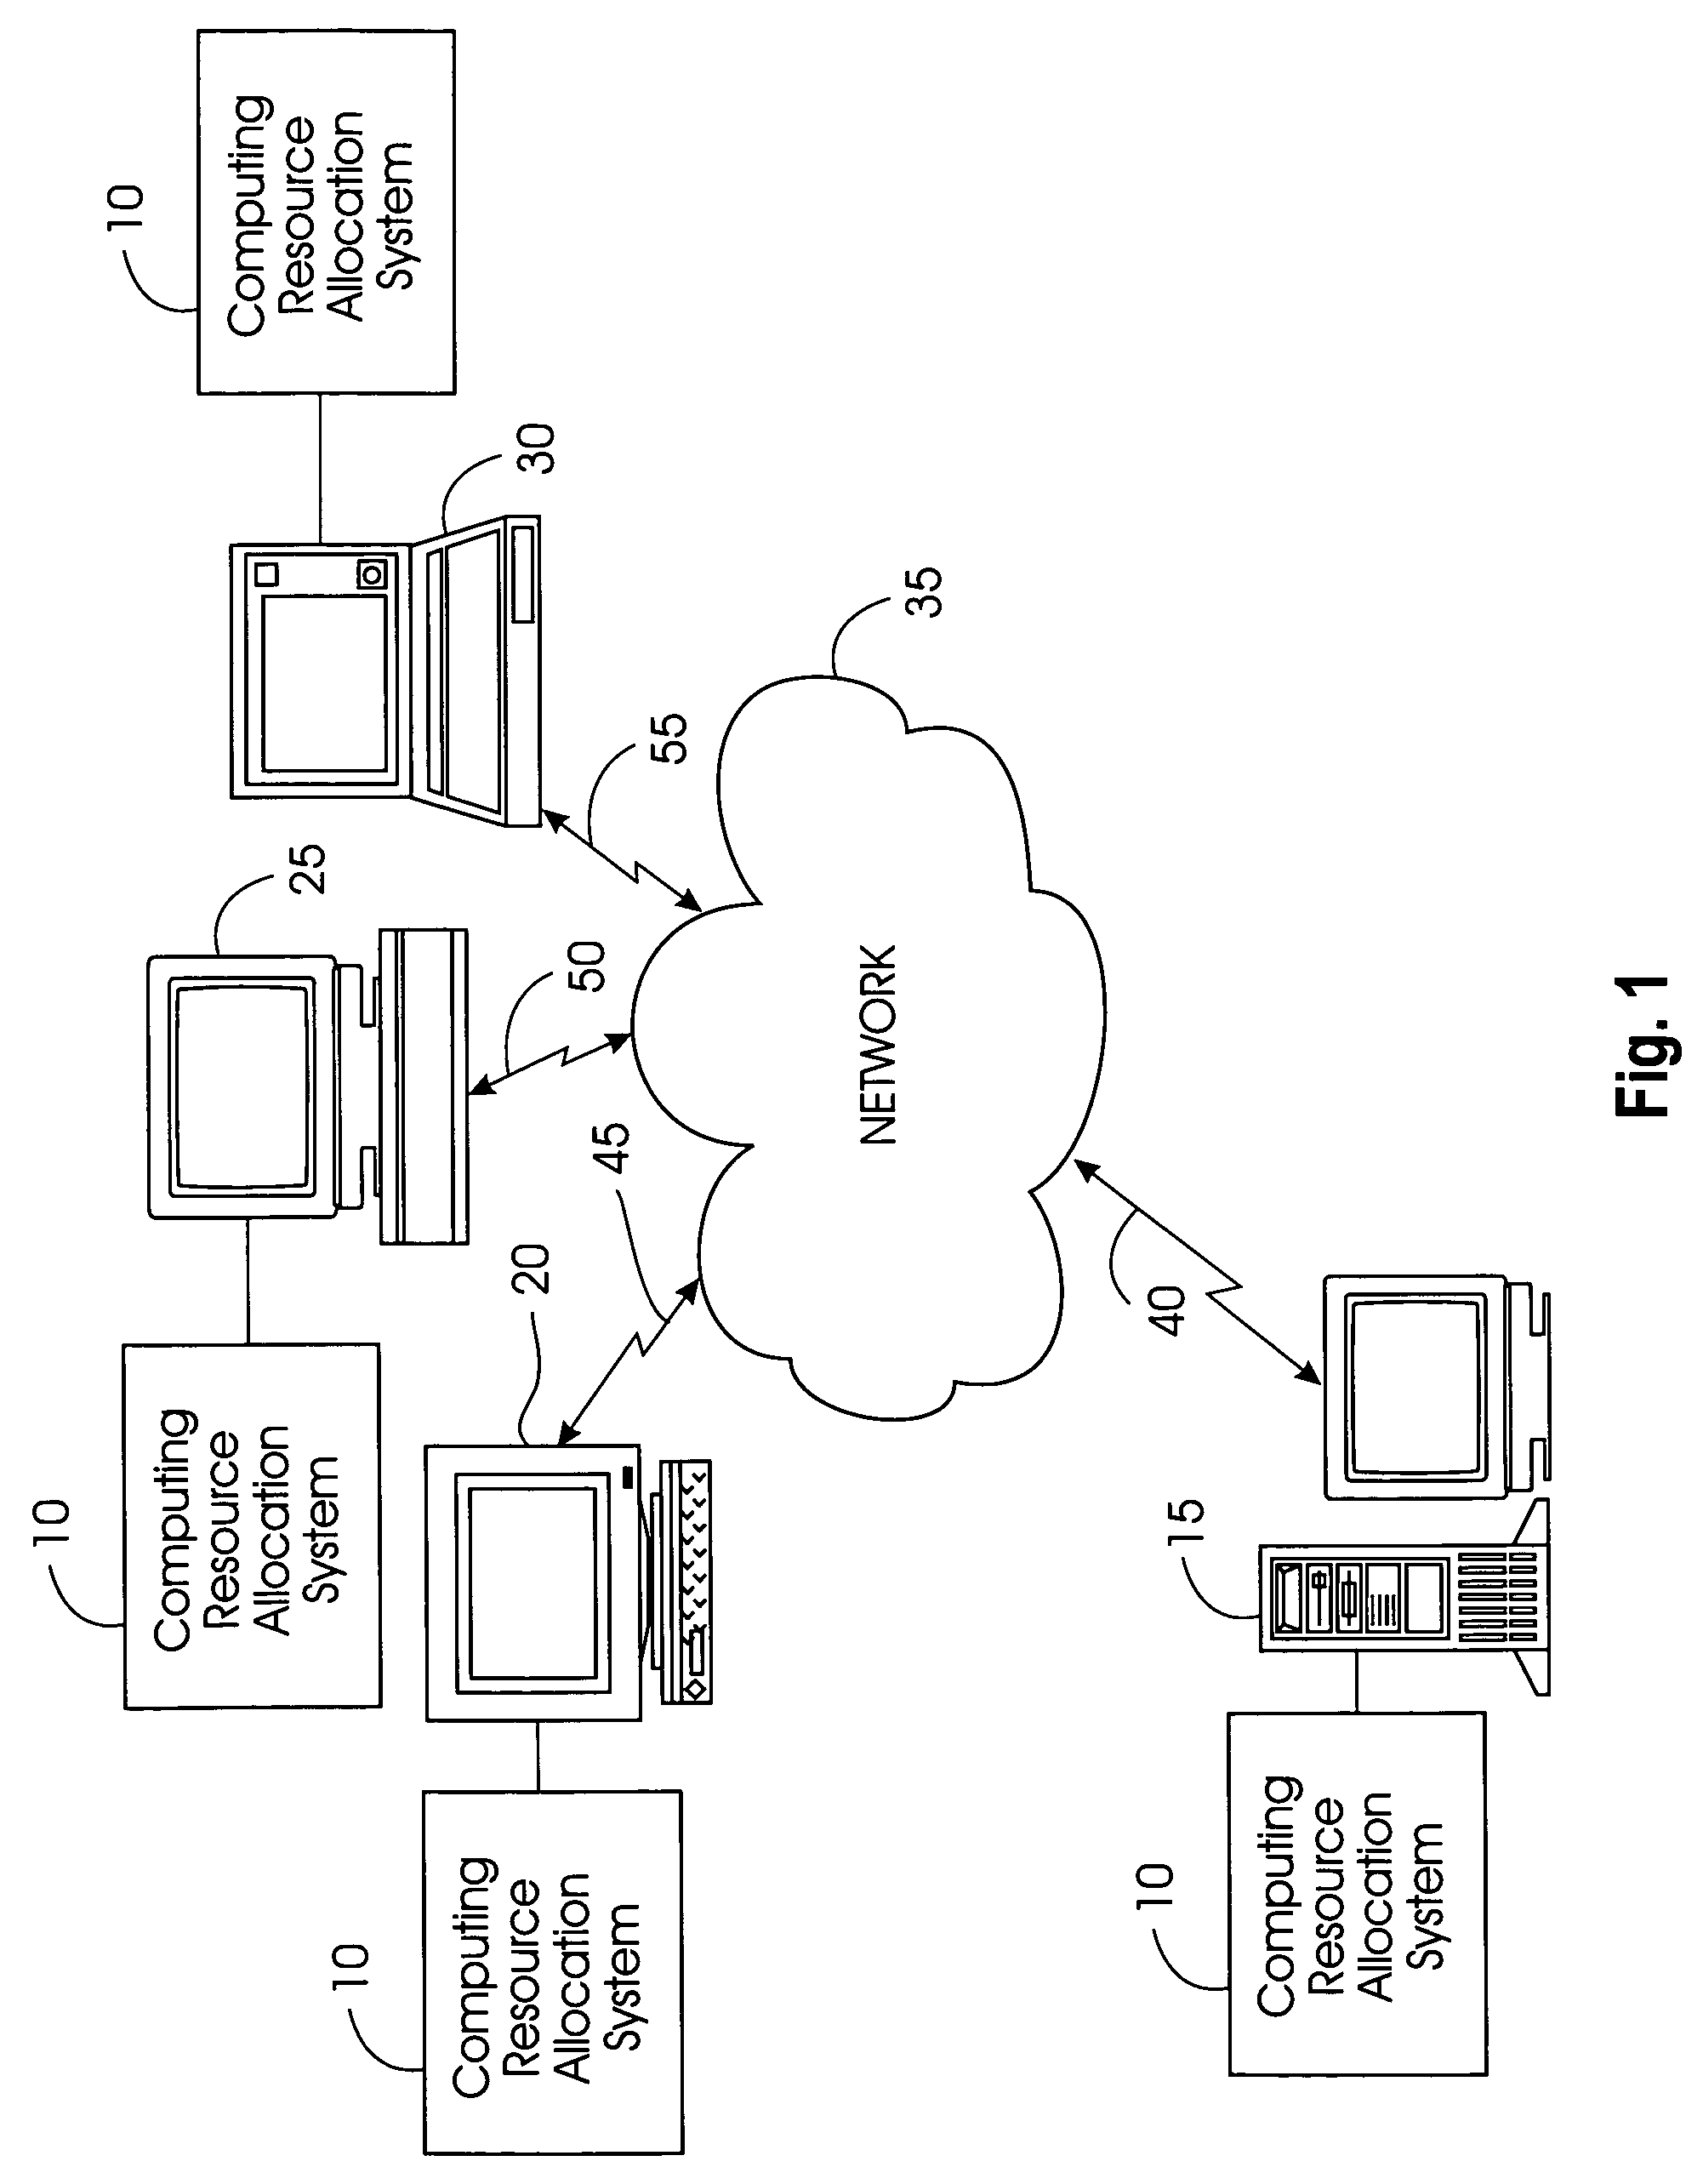 System, method, and service for using a focused random walk to produce samples on a topic from a collection of hyper-linked pages